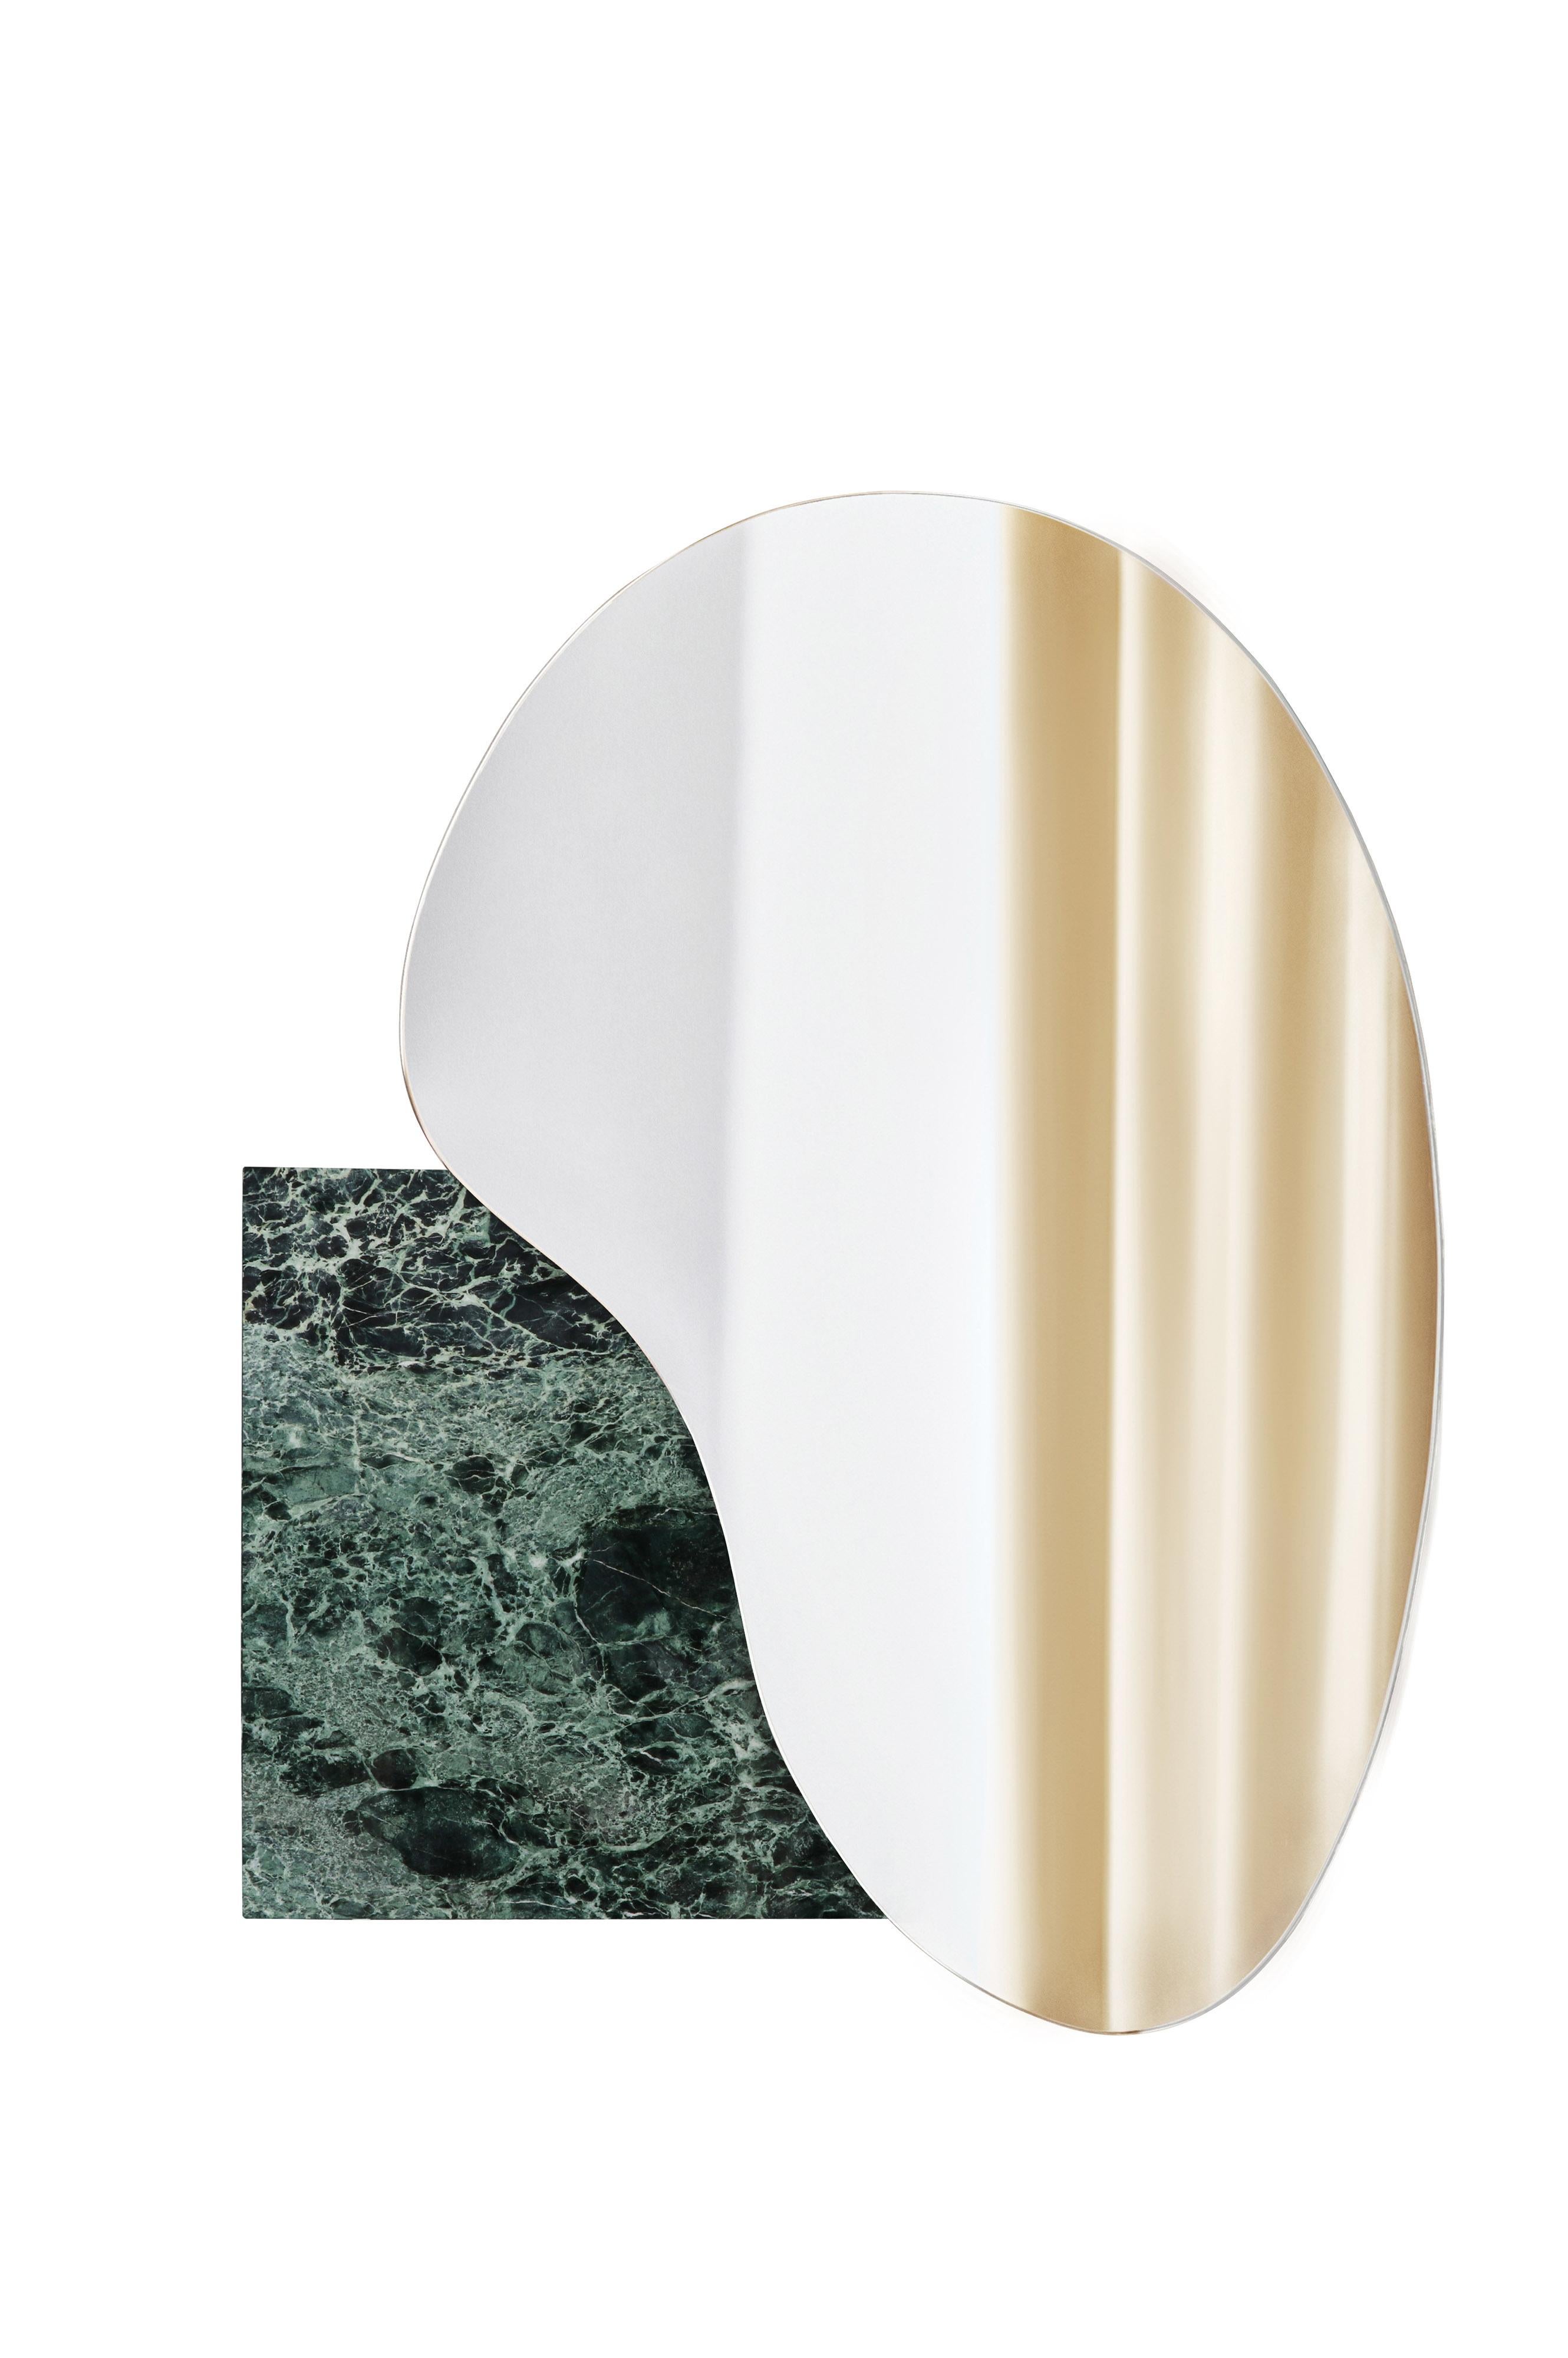 Modern lake wall mirror by Noom
Designers: Maryna Dague & Nathan Baraness

Model shown in picture:
Number 4
Base green marble verde ocean

